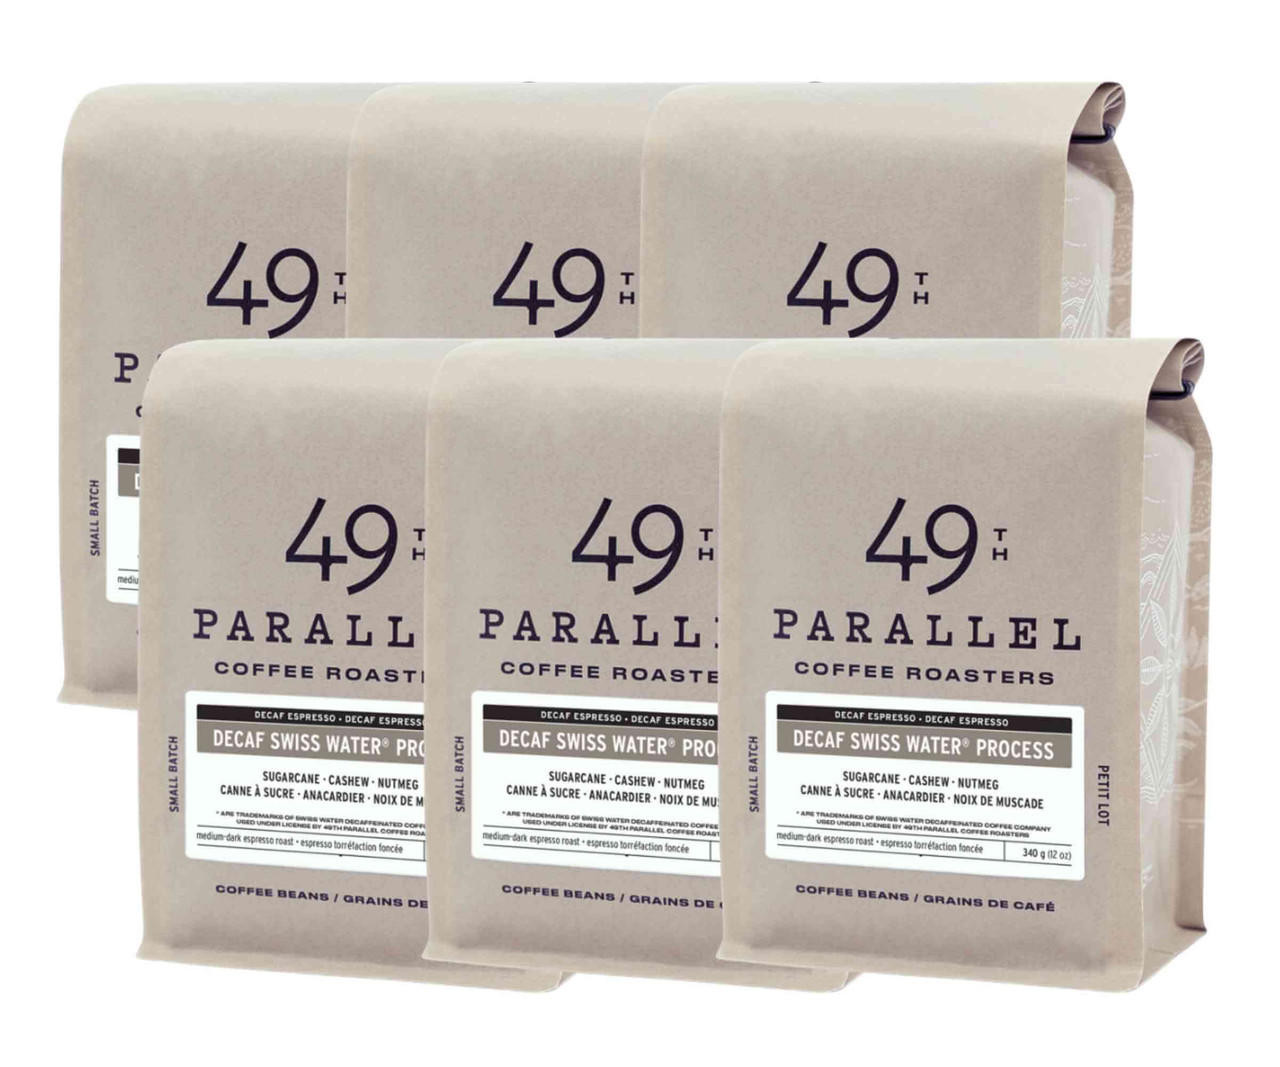  49th Parallel DECAF Swiss Water Process Medium Blend Coffee Beans 0.34 kg / 0.75 lbs (6/Case) 